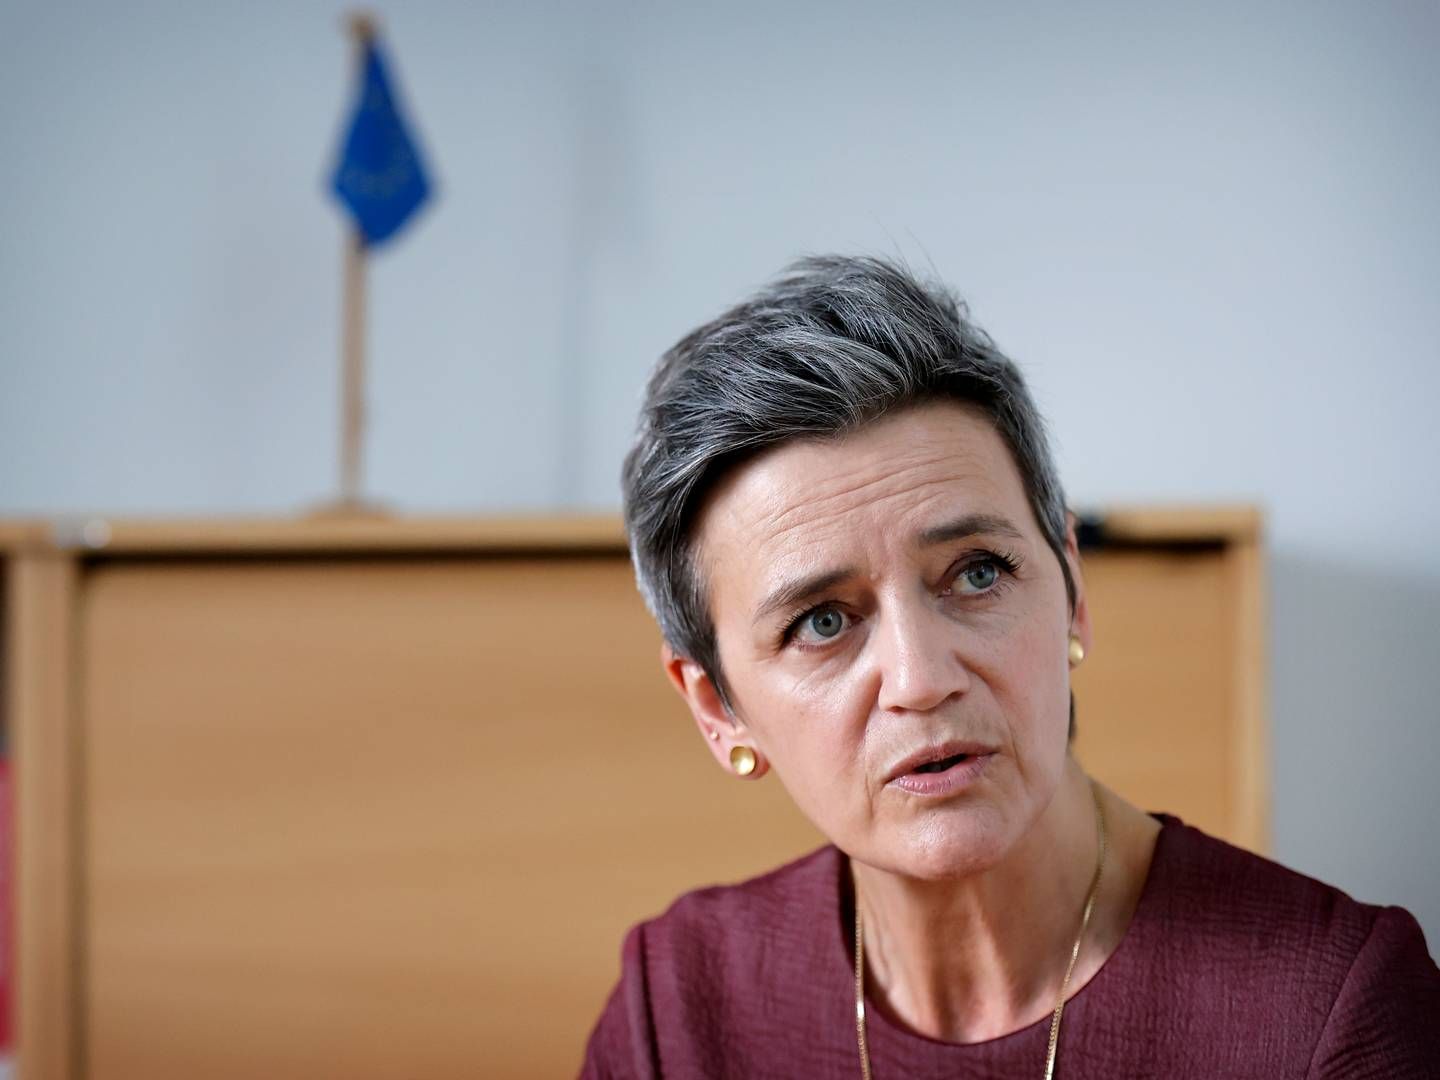 Margrethe Vestager is Executive Vice-President of the European Commission. | Photo: Jens Dresling